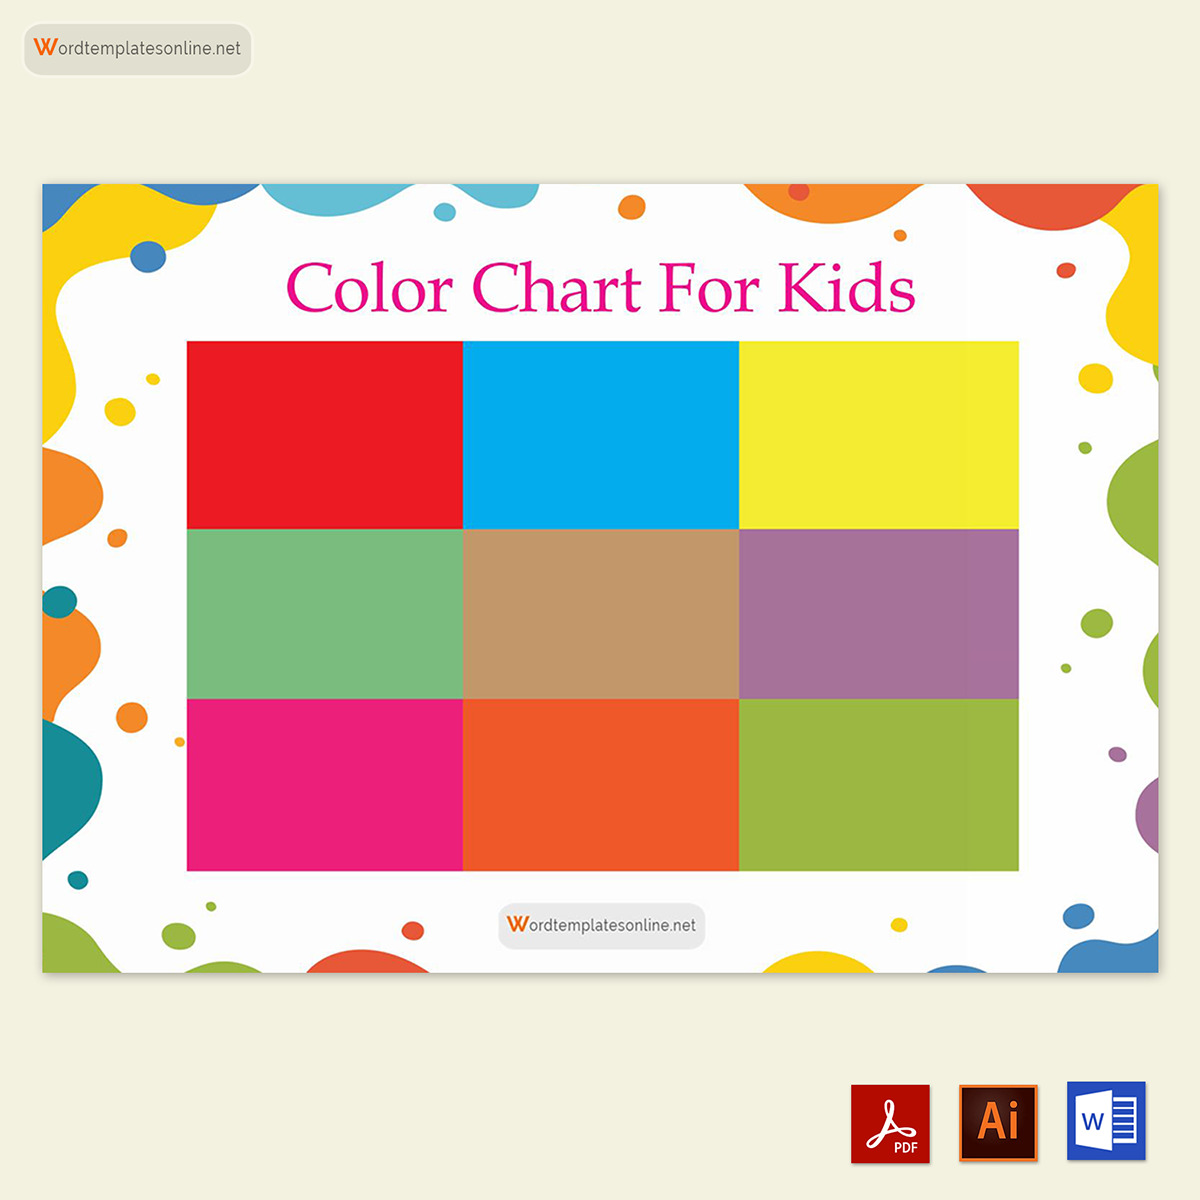 Free Printable Rainbow Coloring Chart for Kids Sample 01 in Word and Adobe Format